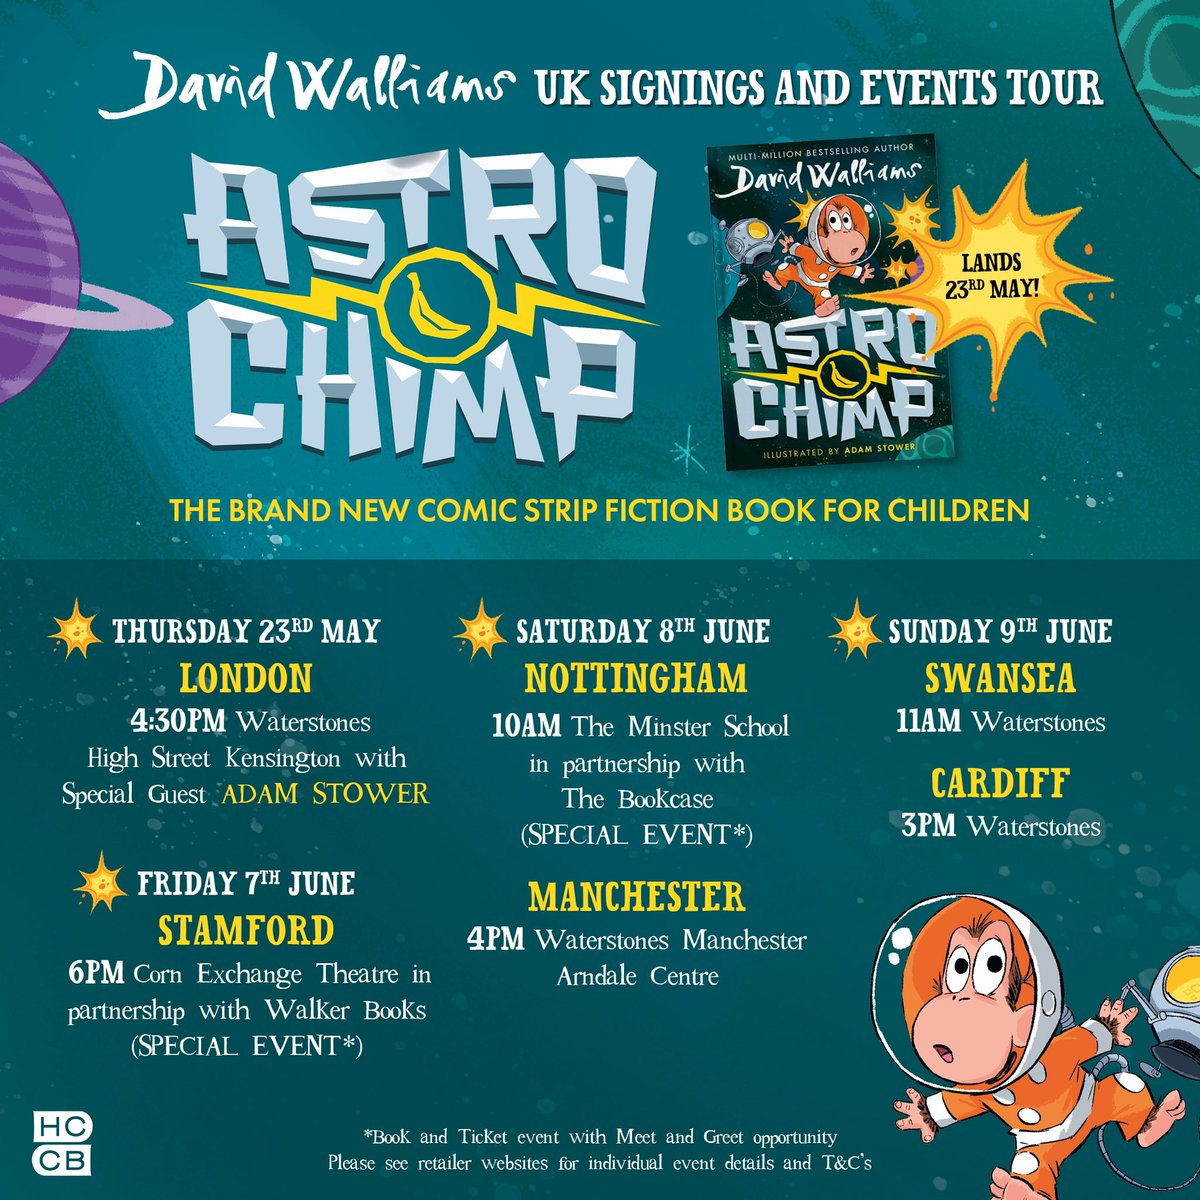 David is delighted to announce a UK signing & events tour for #ASTROCHIMP Find out more & book your tickets here: bit.ly/AstrochimpTour